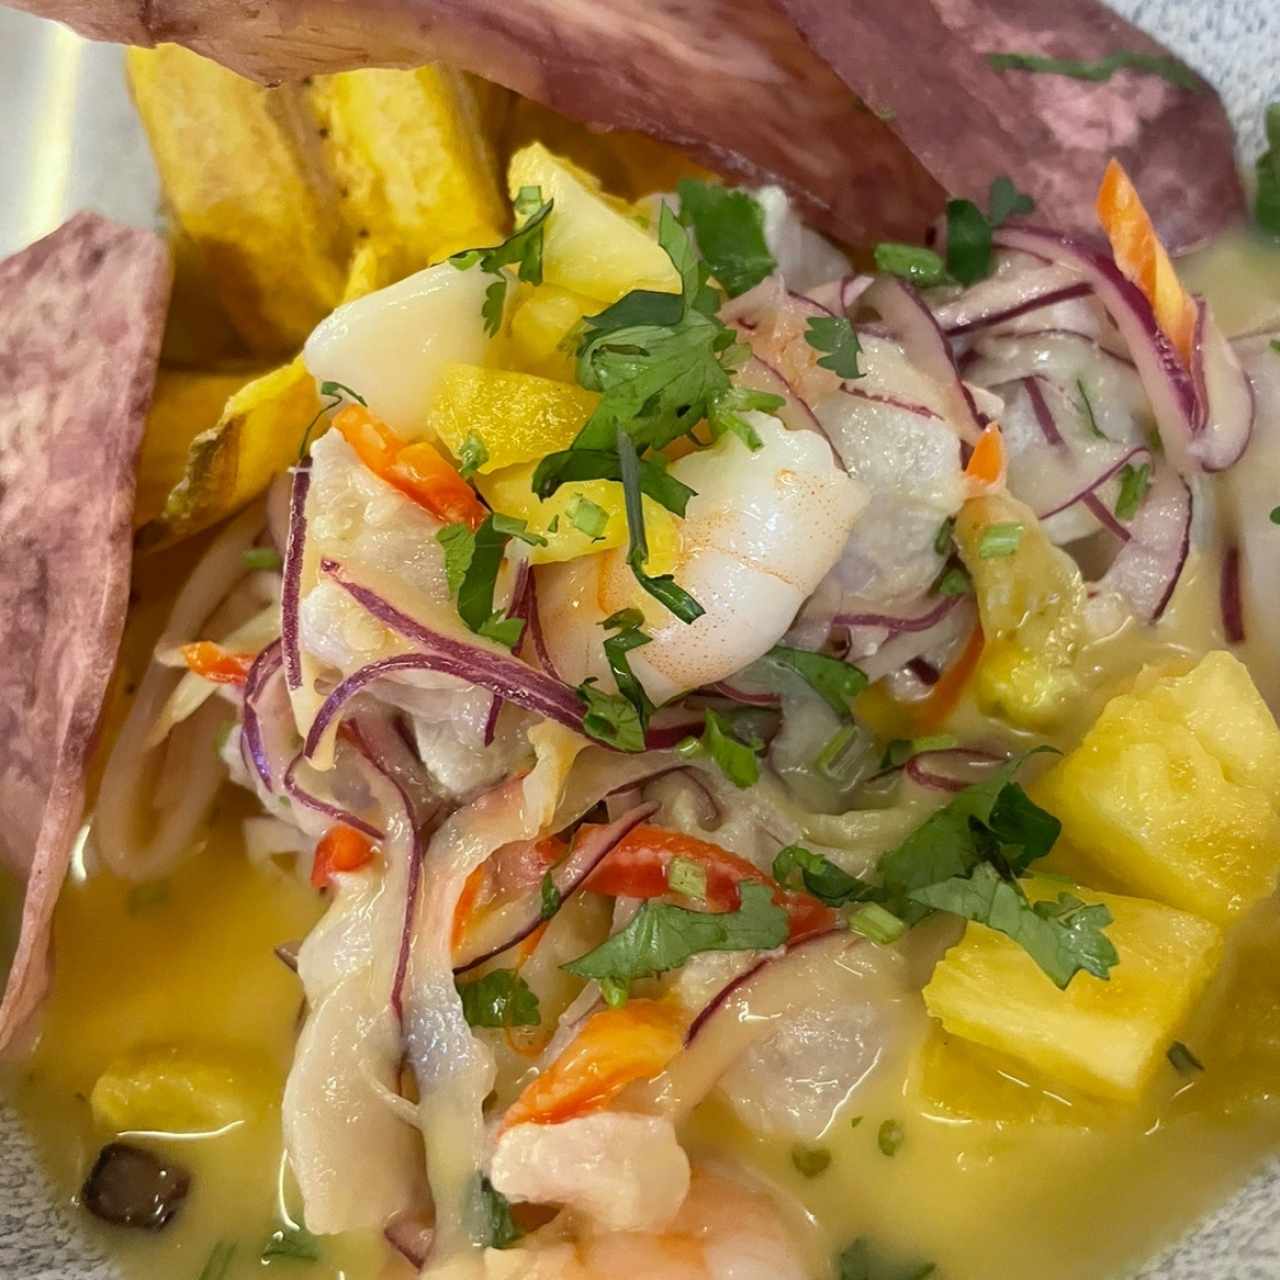 Ceviches - Ceviche limeño